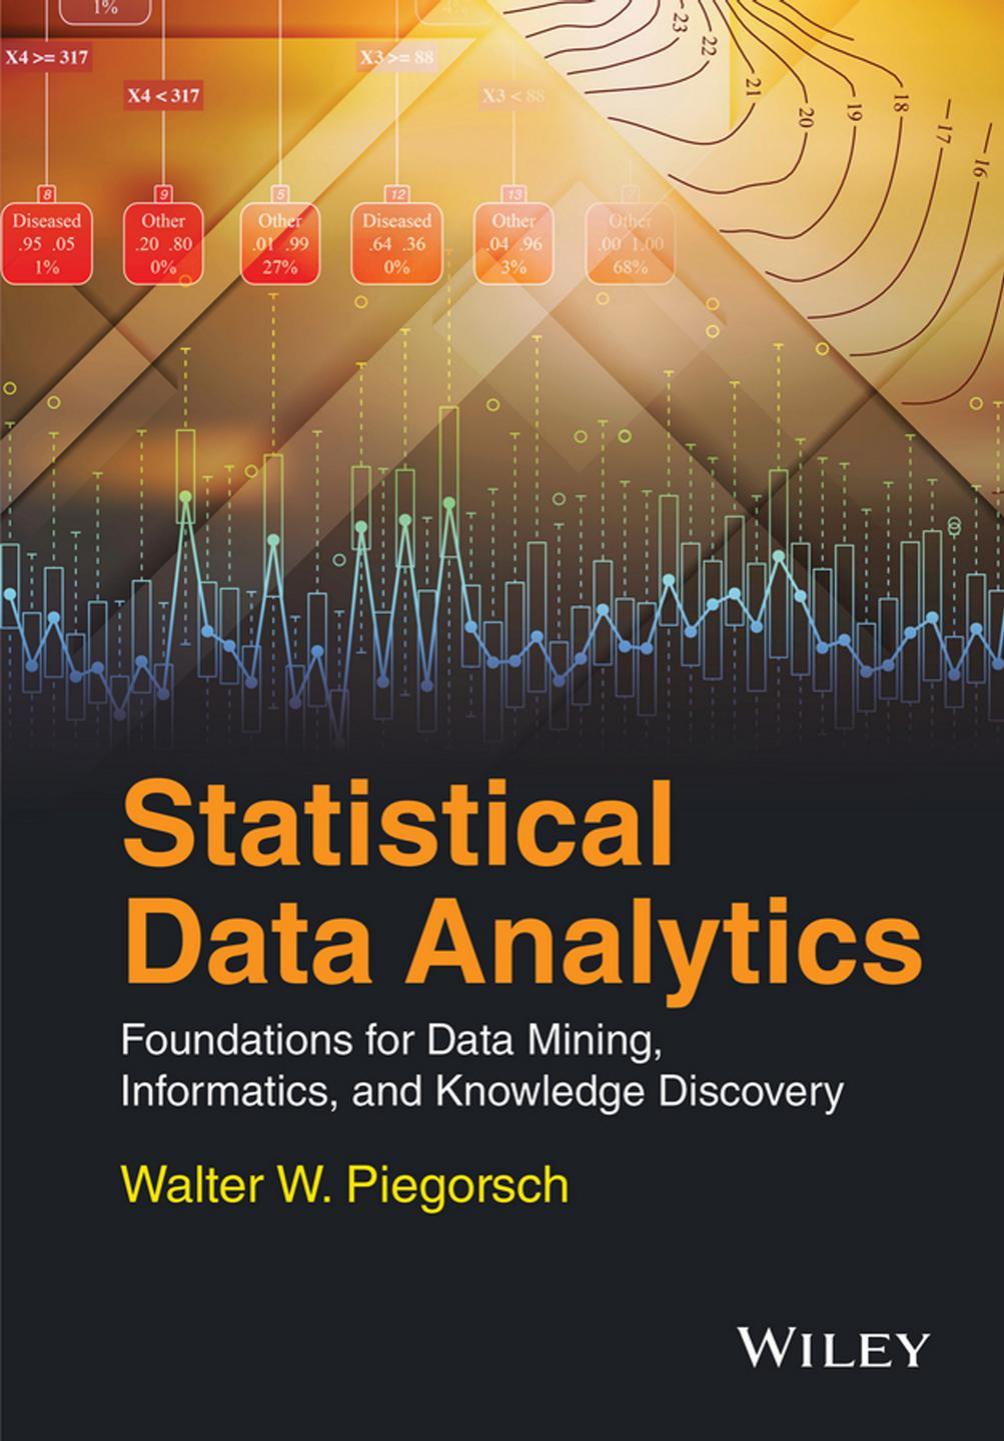 Statistical Data Analytics - Foundations for Data Mining, Informatics, and Knowledge Discovery, Solutions Manual